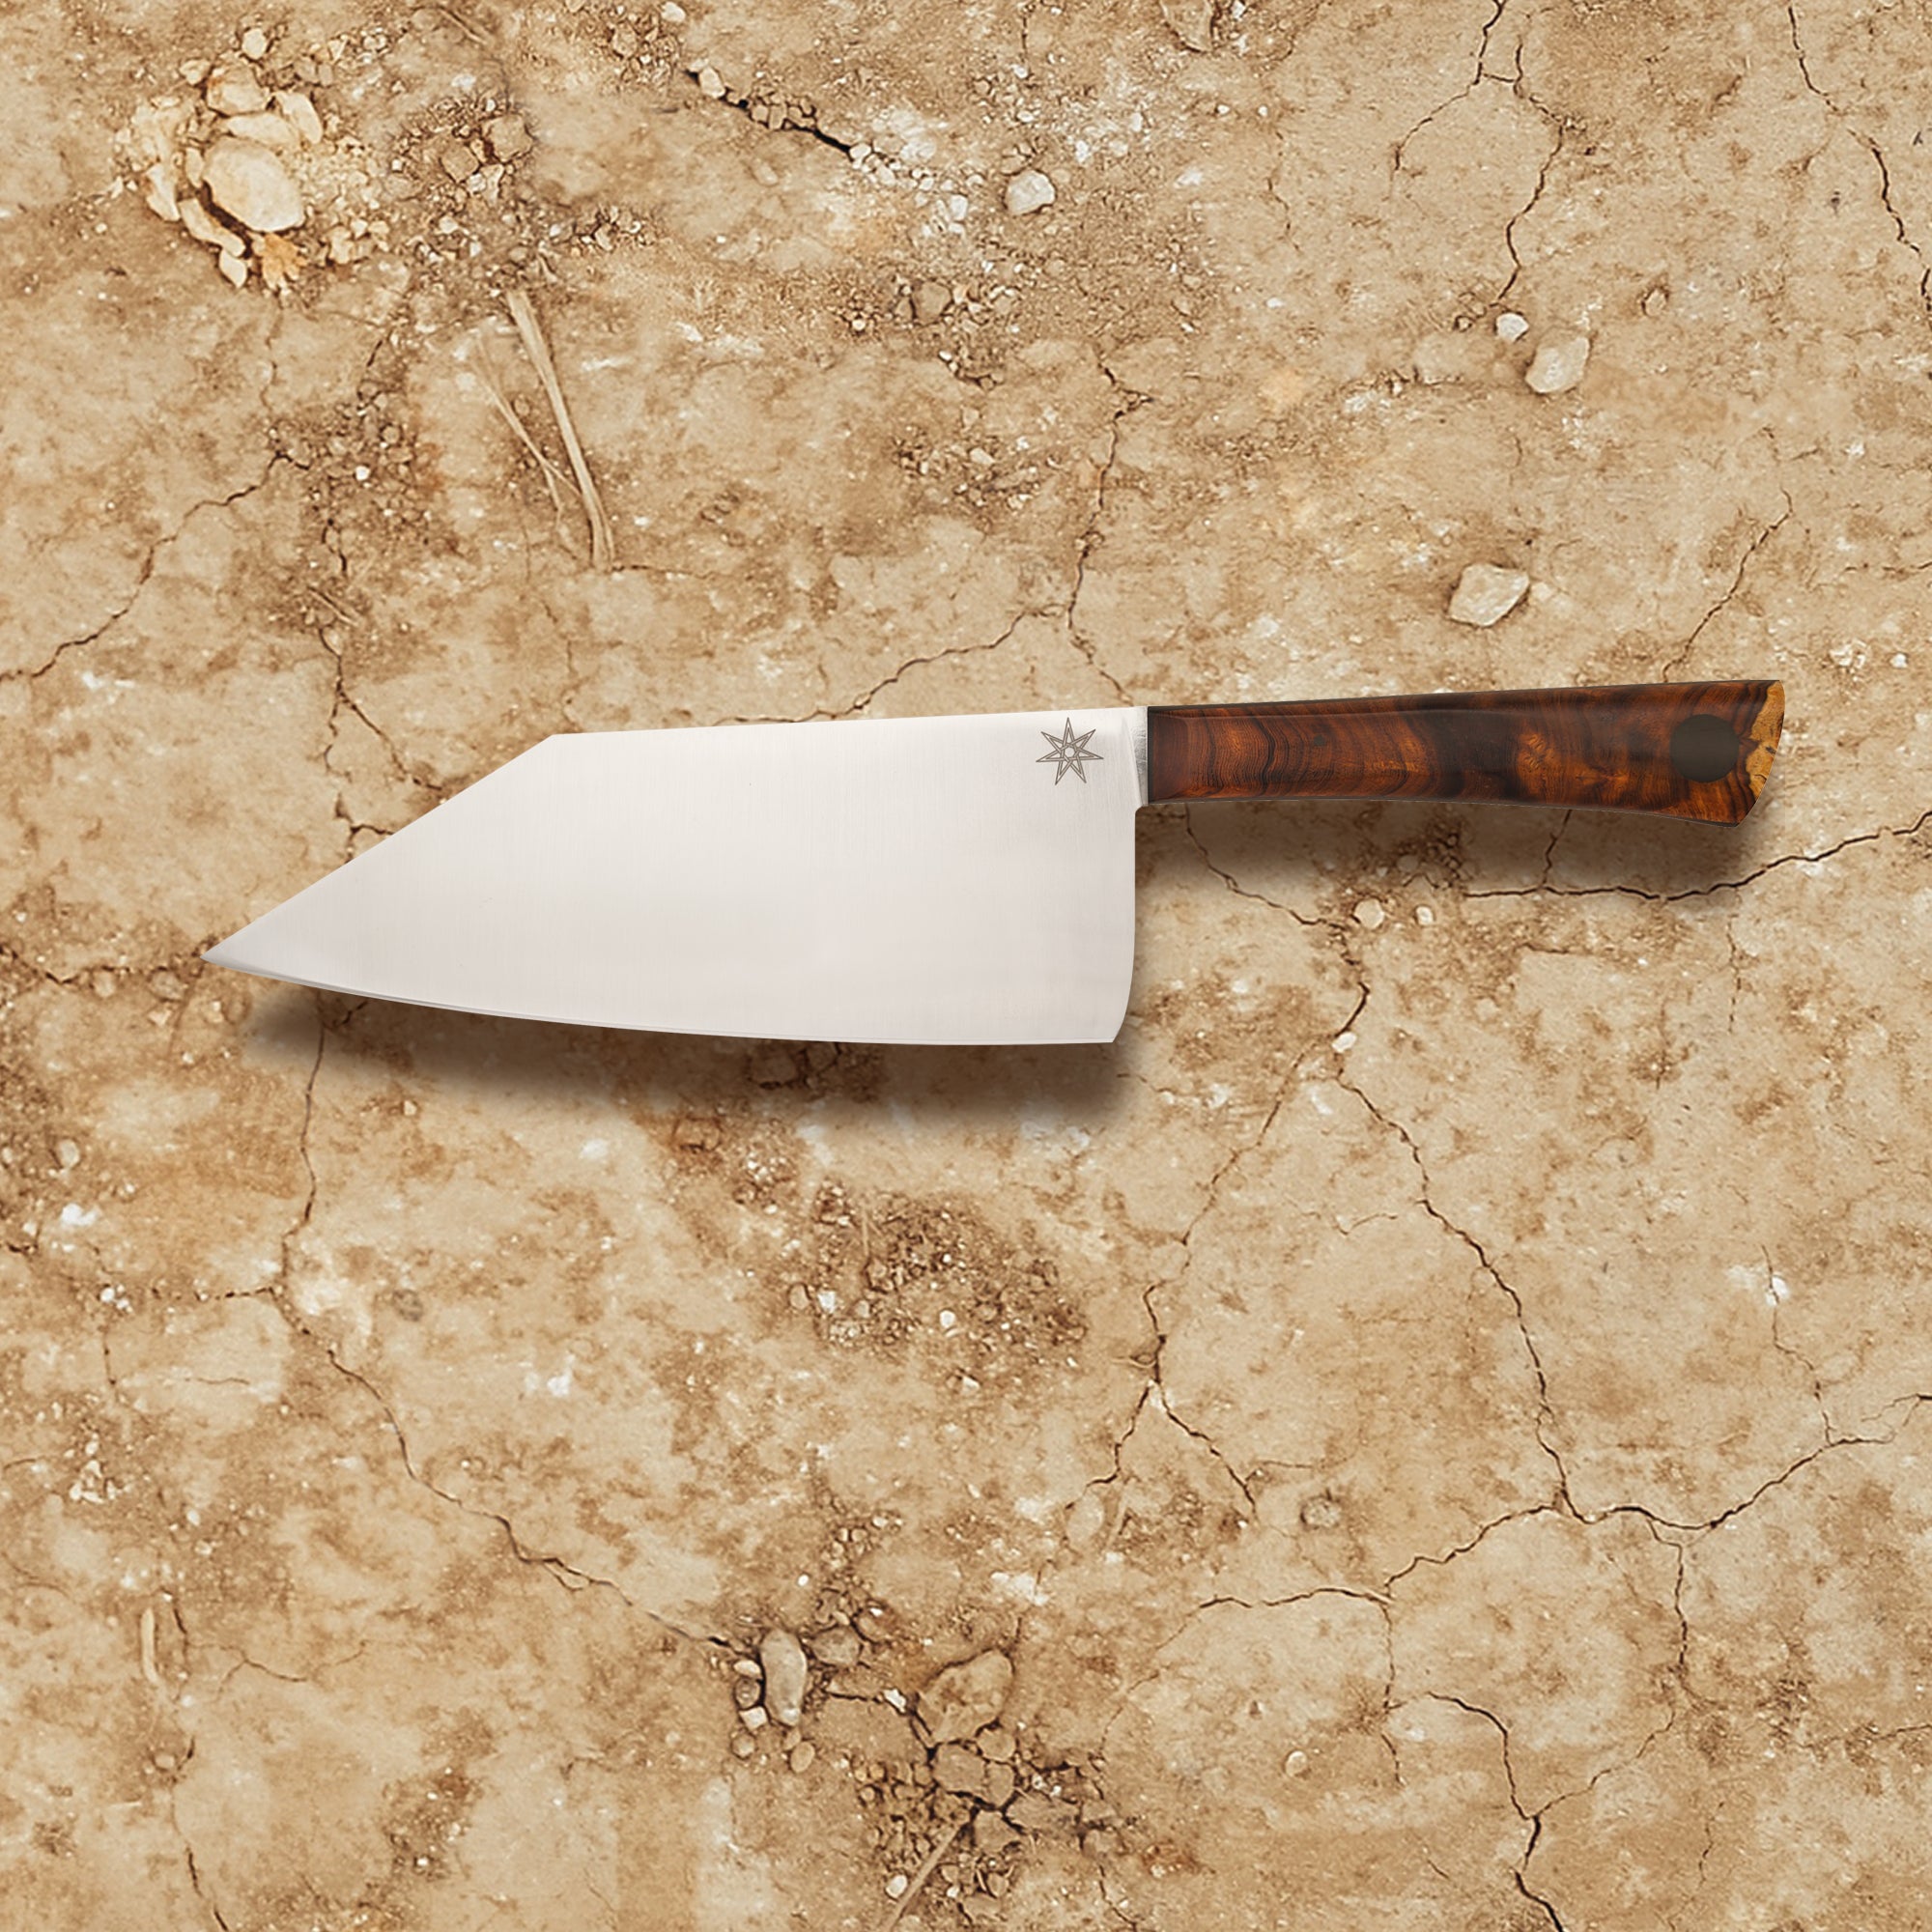 Unique kitchen knife called the Chopper. 7.5" stainless steel blade and lux desert ironwood handle. Made by Town Cutler.